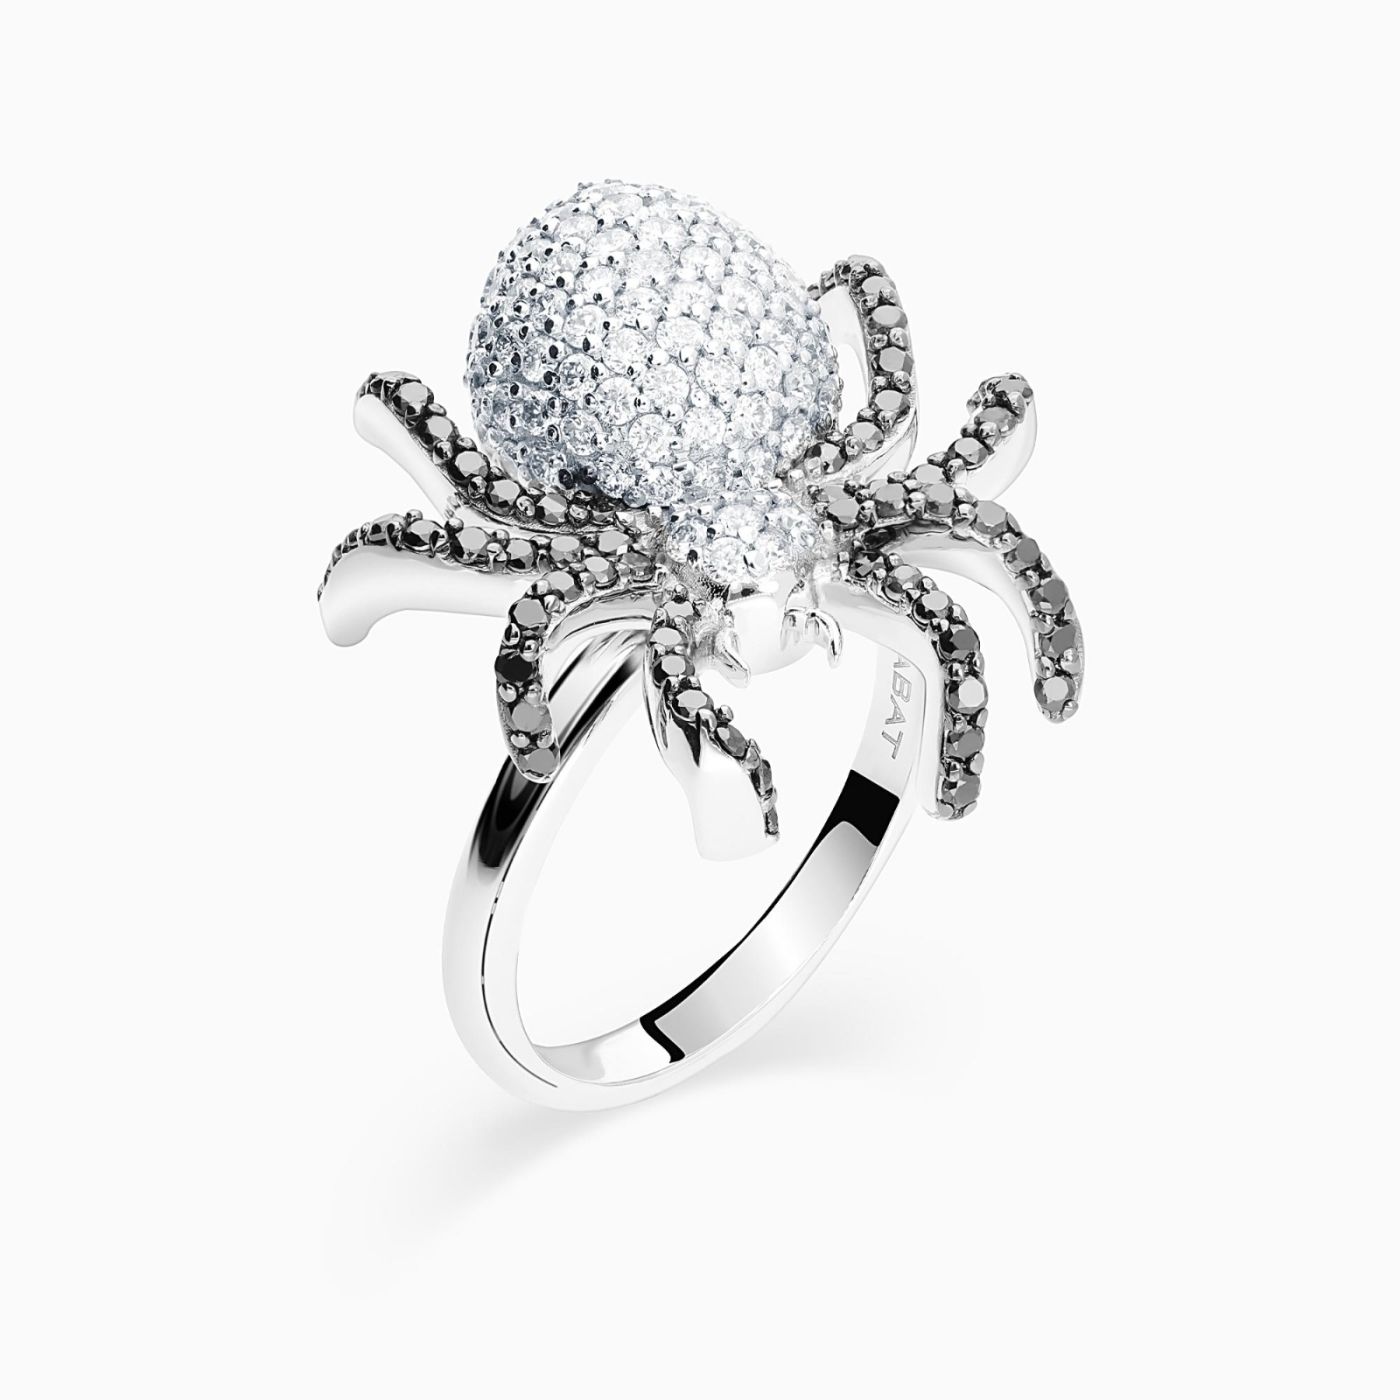 White gold spider ring with black and white diamonds